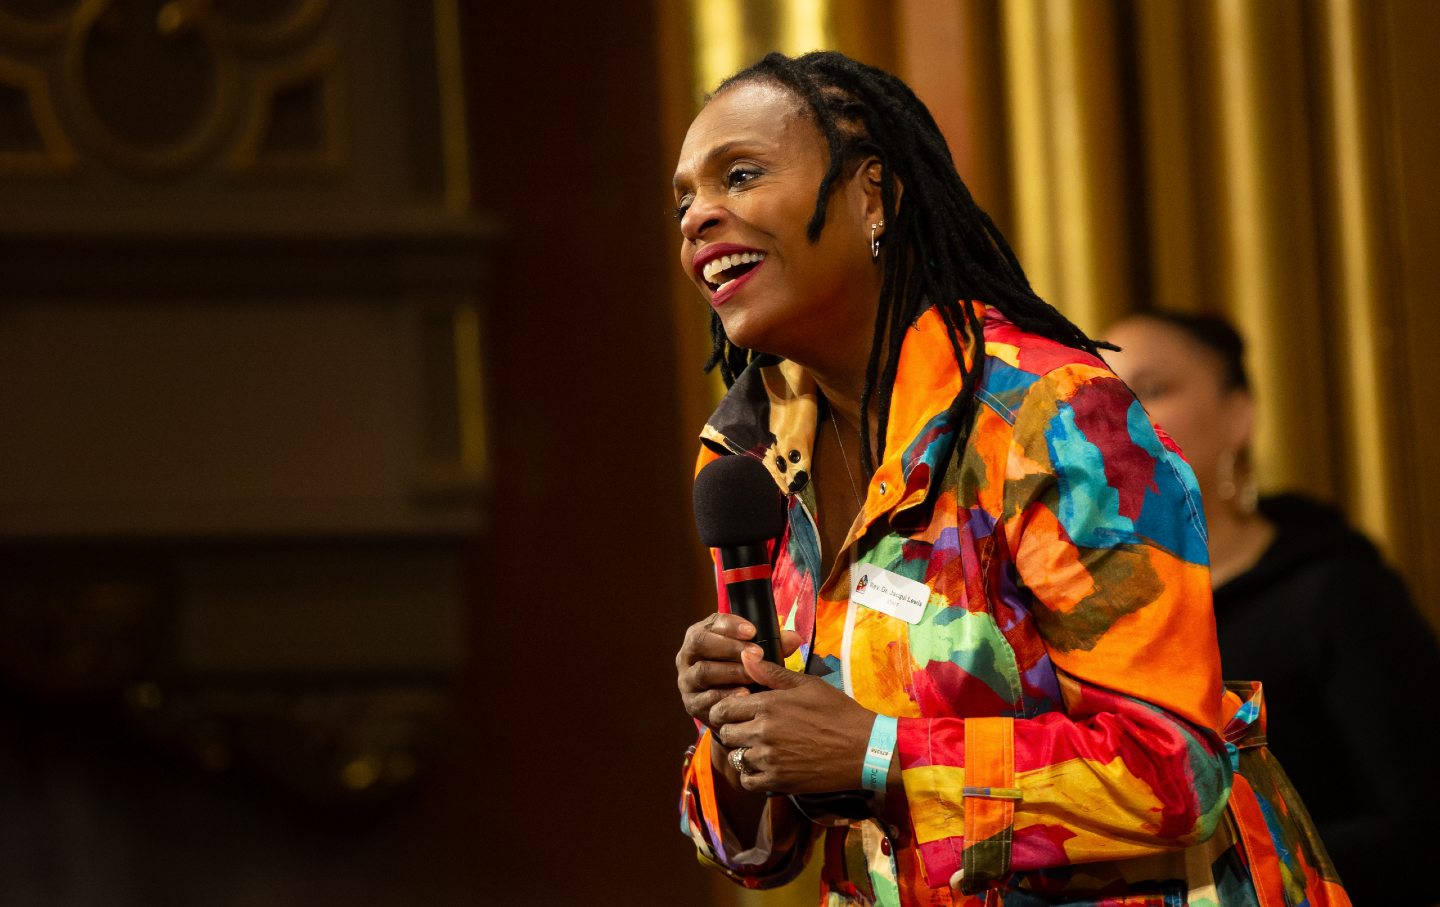 The Rev. Jacqui Lewis speaks at the Freedom Rising Conference in New York City.